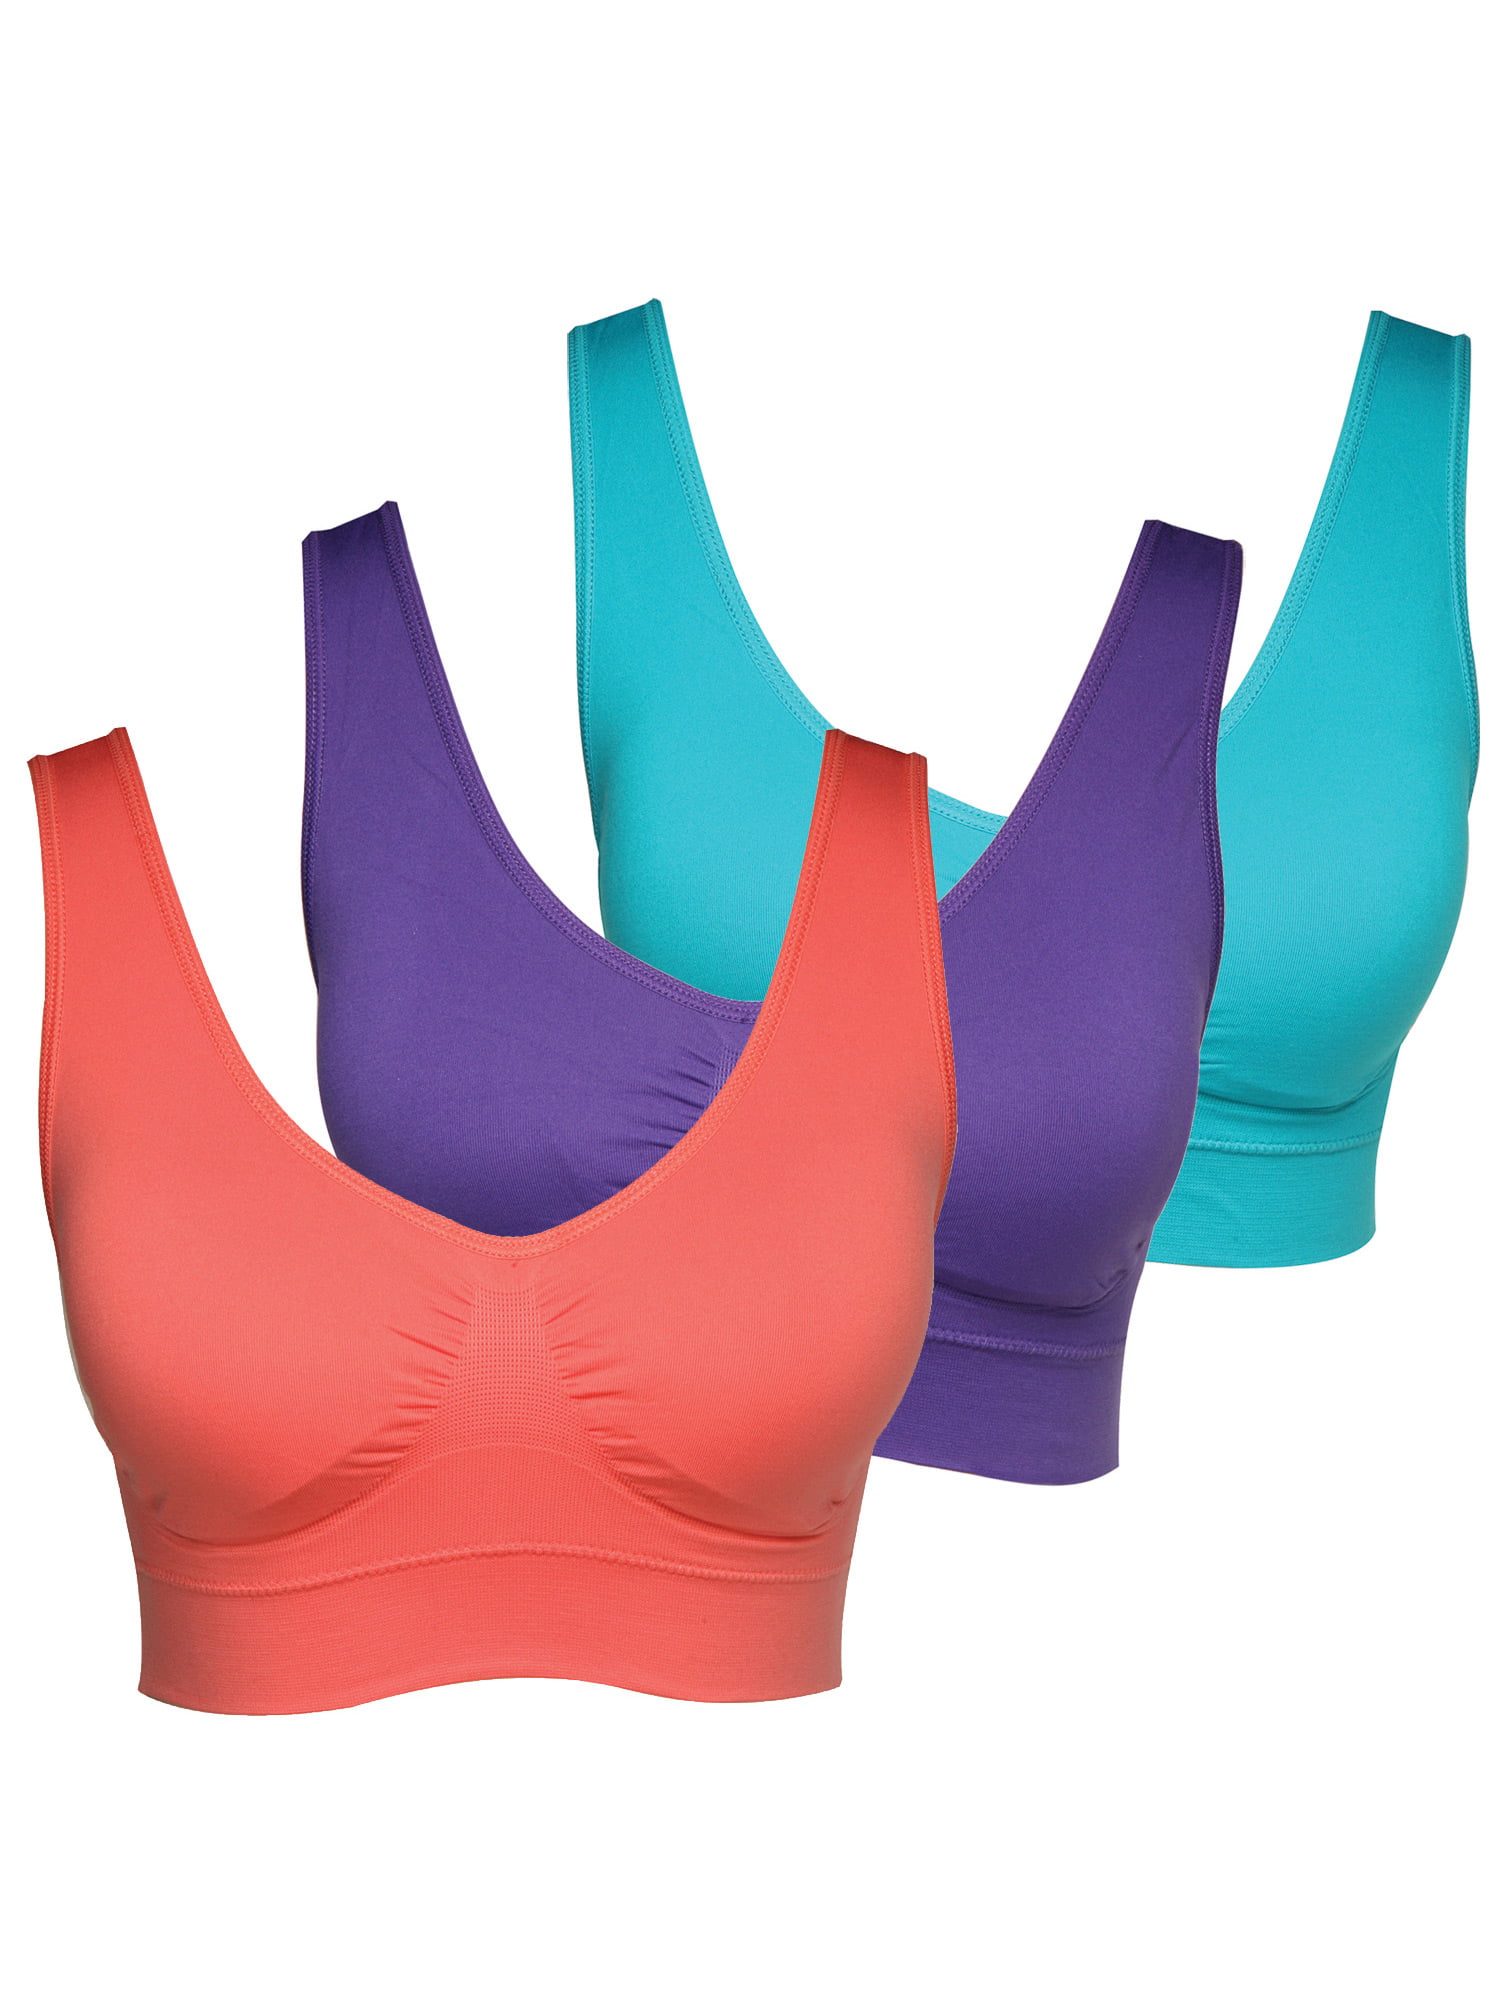 Nylon Spandex Comfort Seamless Wirefree Genie Bras for Girls with Removable Pads